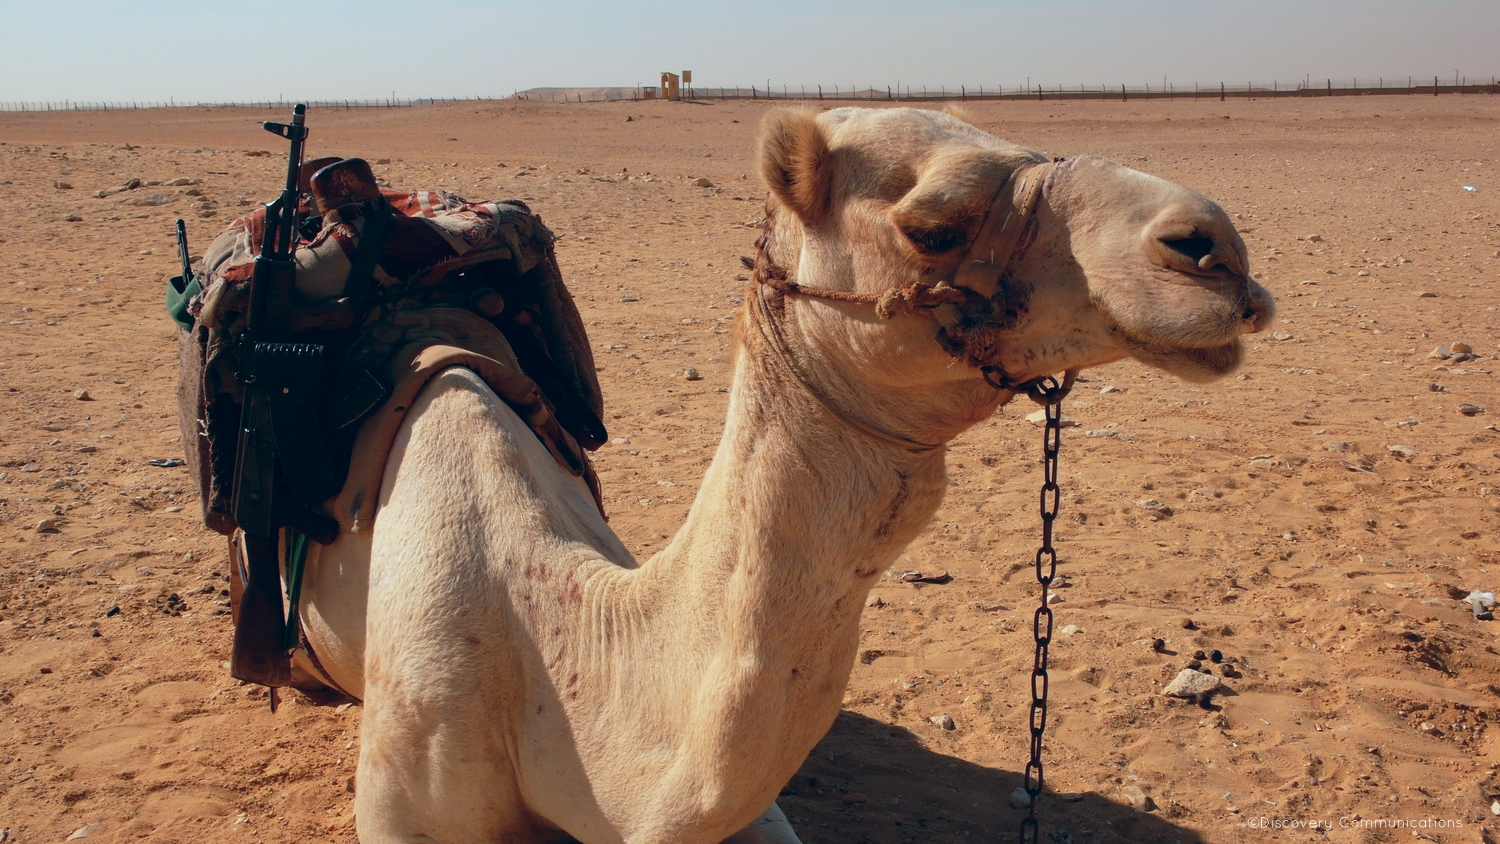  Armed to the hump. Don't mess with this camel! 